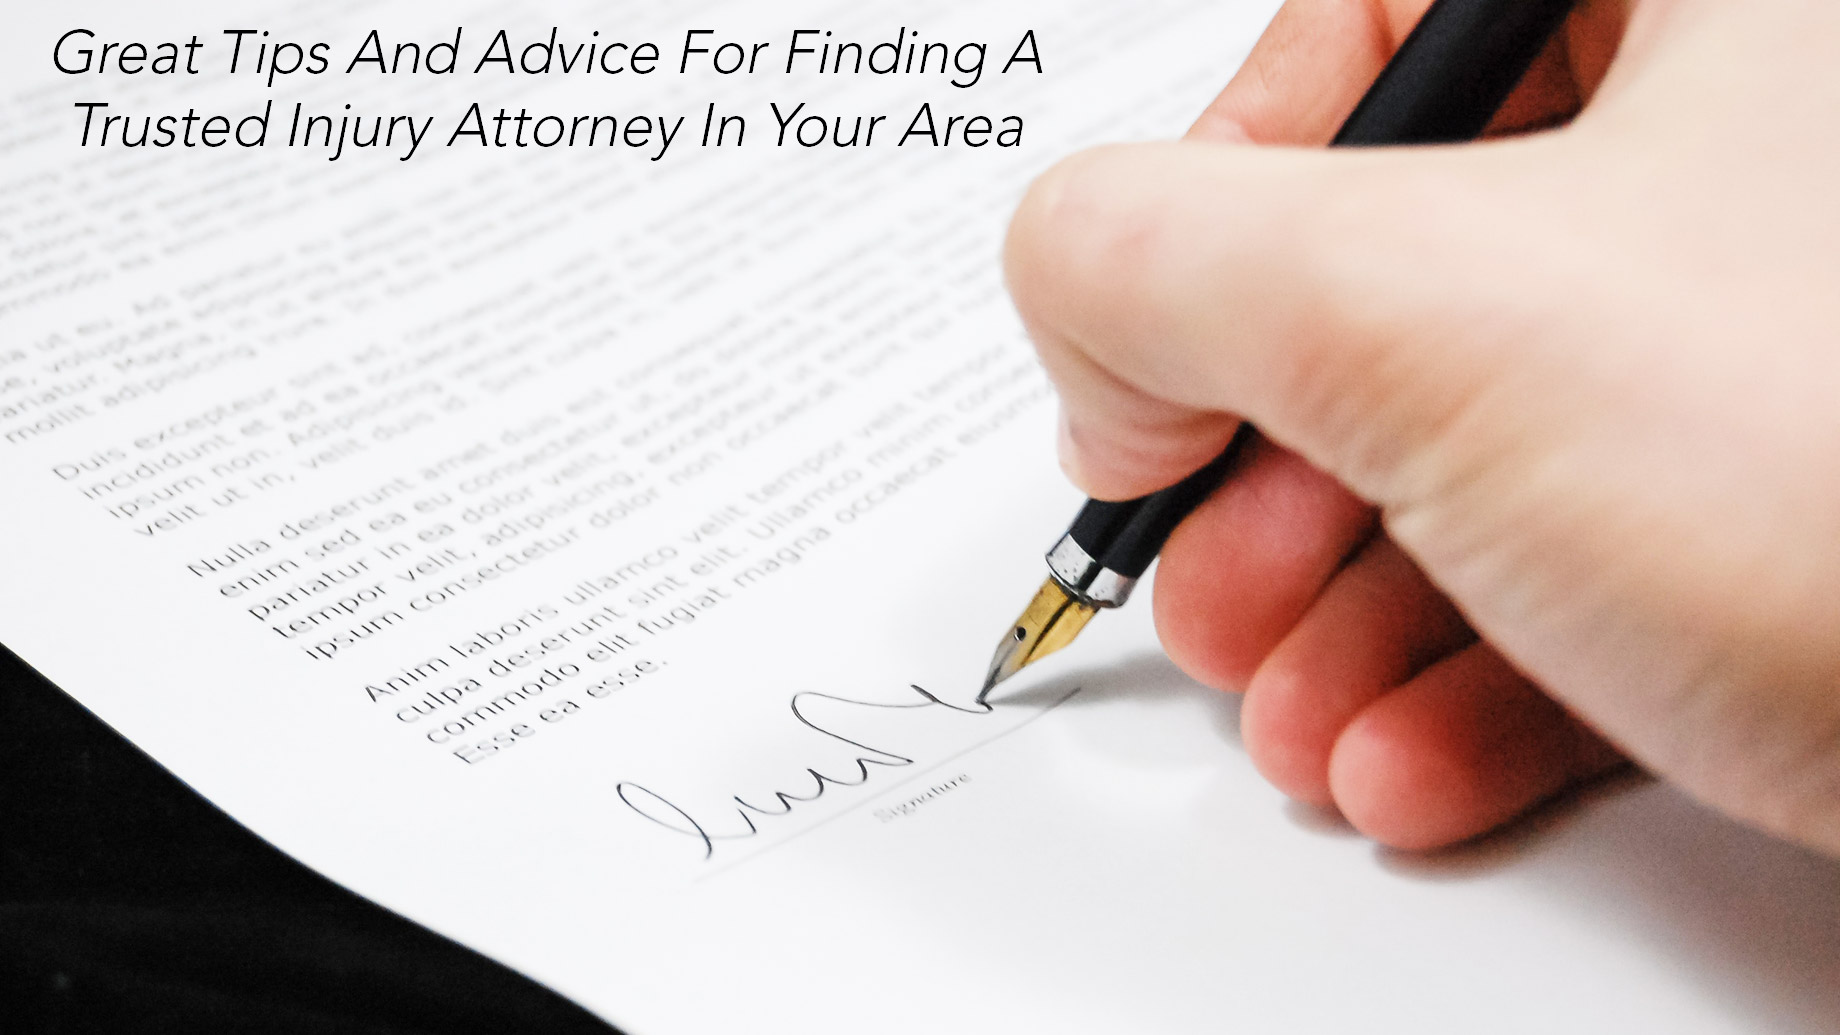 Great Tips And Advice For Finding A Trusted Injury Attorney In Your Area